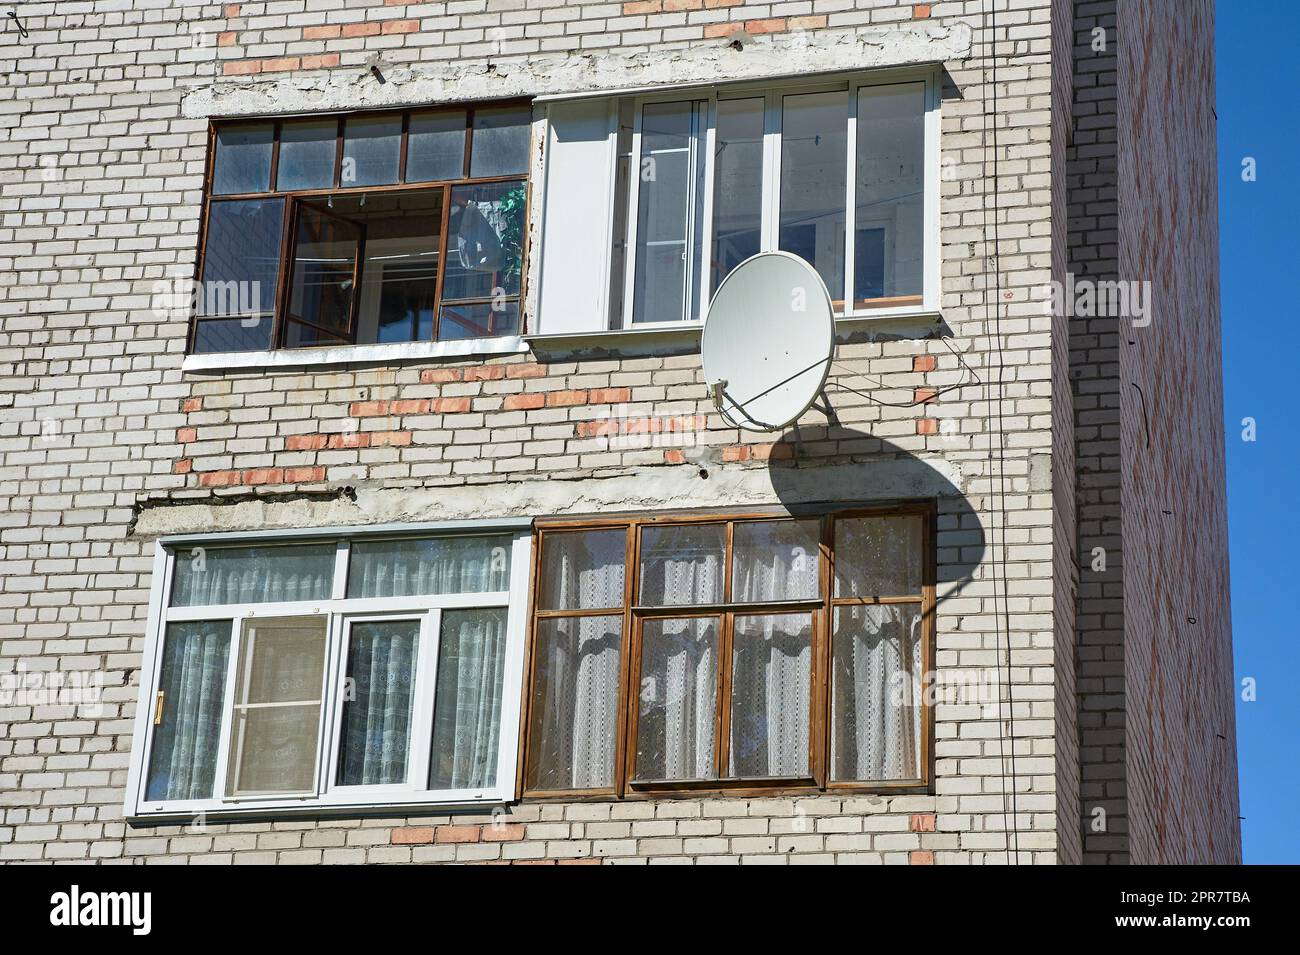 A satellite dish is hanging on the wall of a brick house Stock Photo